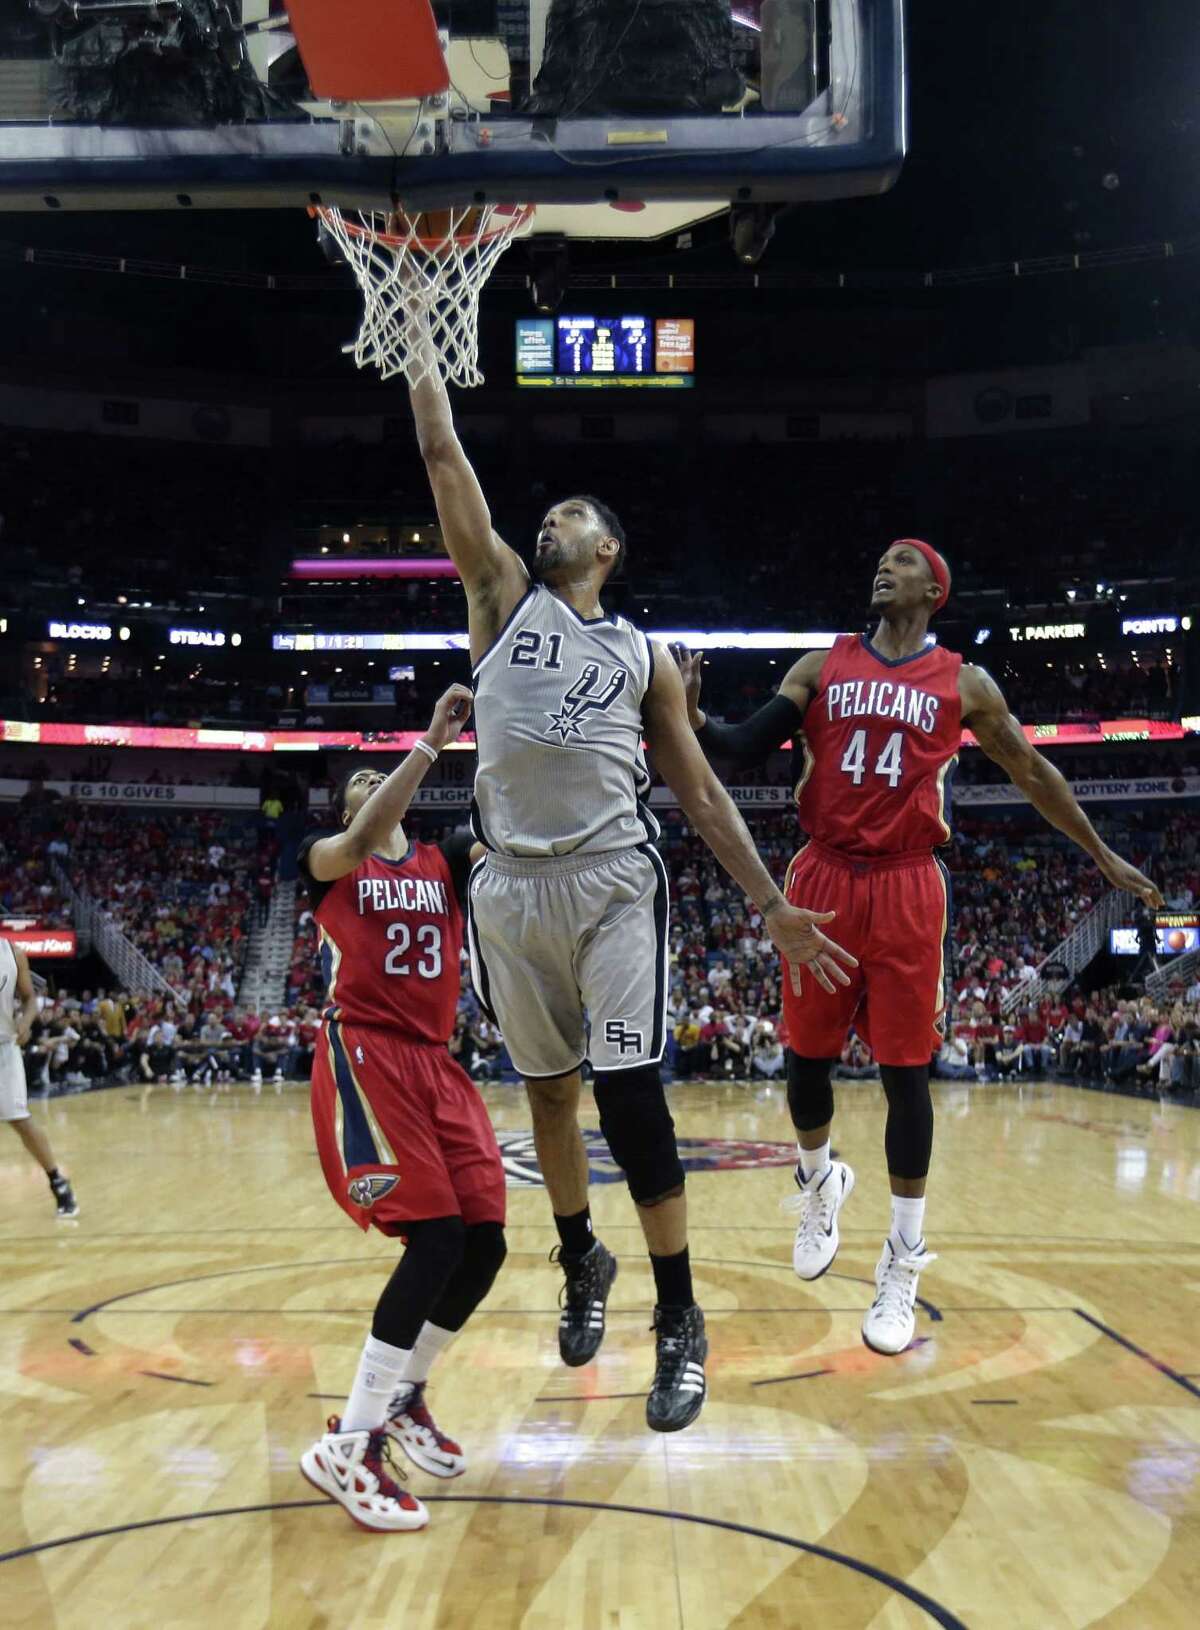 San Antonio Spurs forward Tim Duncan (21) goes to the basket in front of New Orleans Pelicans forward Anthony Davis (23) and forward Dante Cunningham (44) in the first half of an NBA basketball game in New Orleans, Wednesday, April 15, 2015.